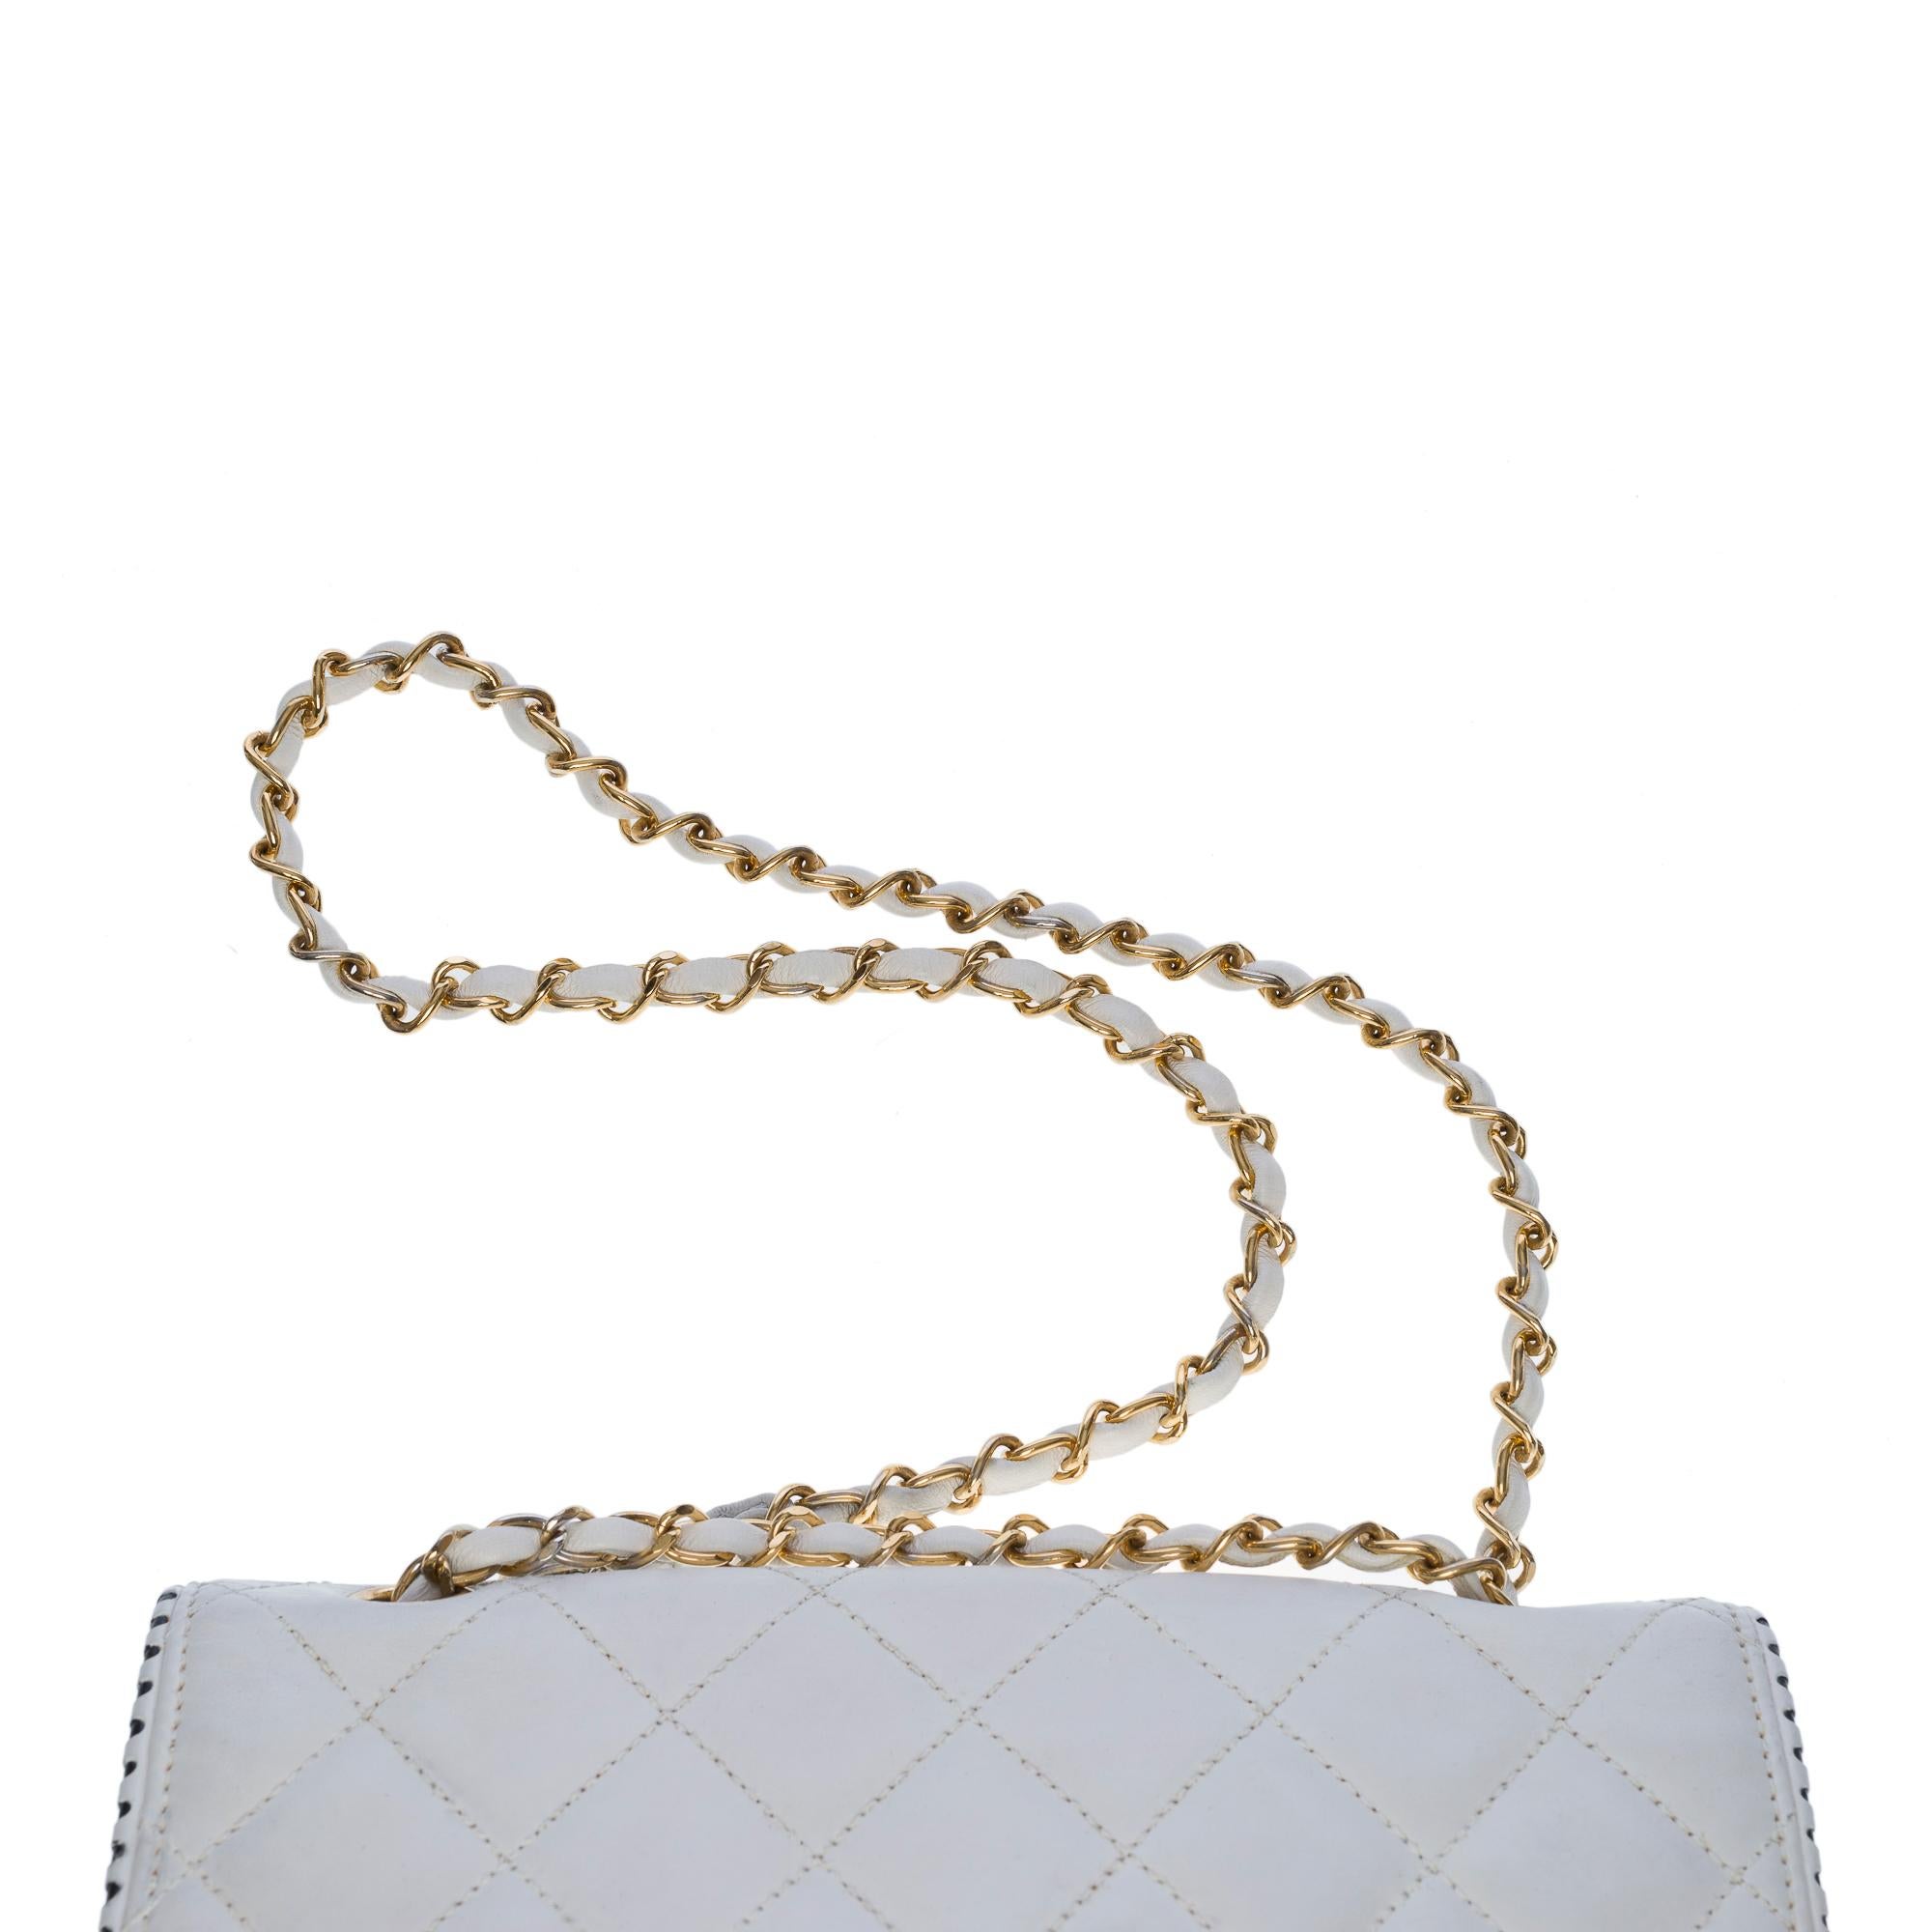 Chanel Timeless Medium single flap shoulder bag in white quilted leather, GHW For Sale 4